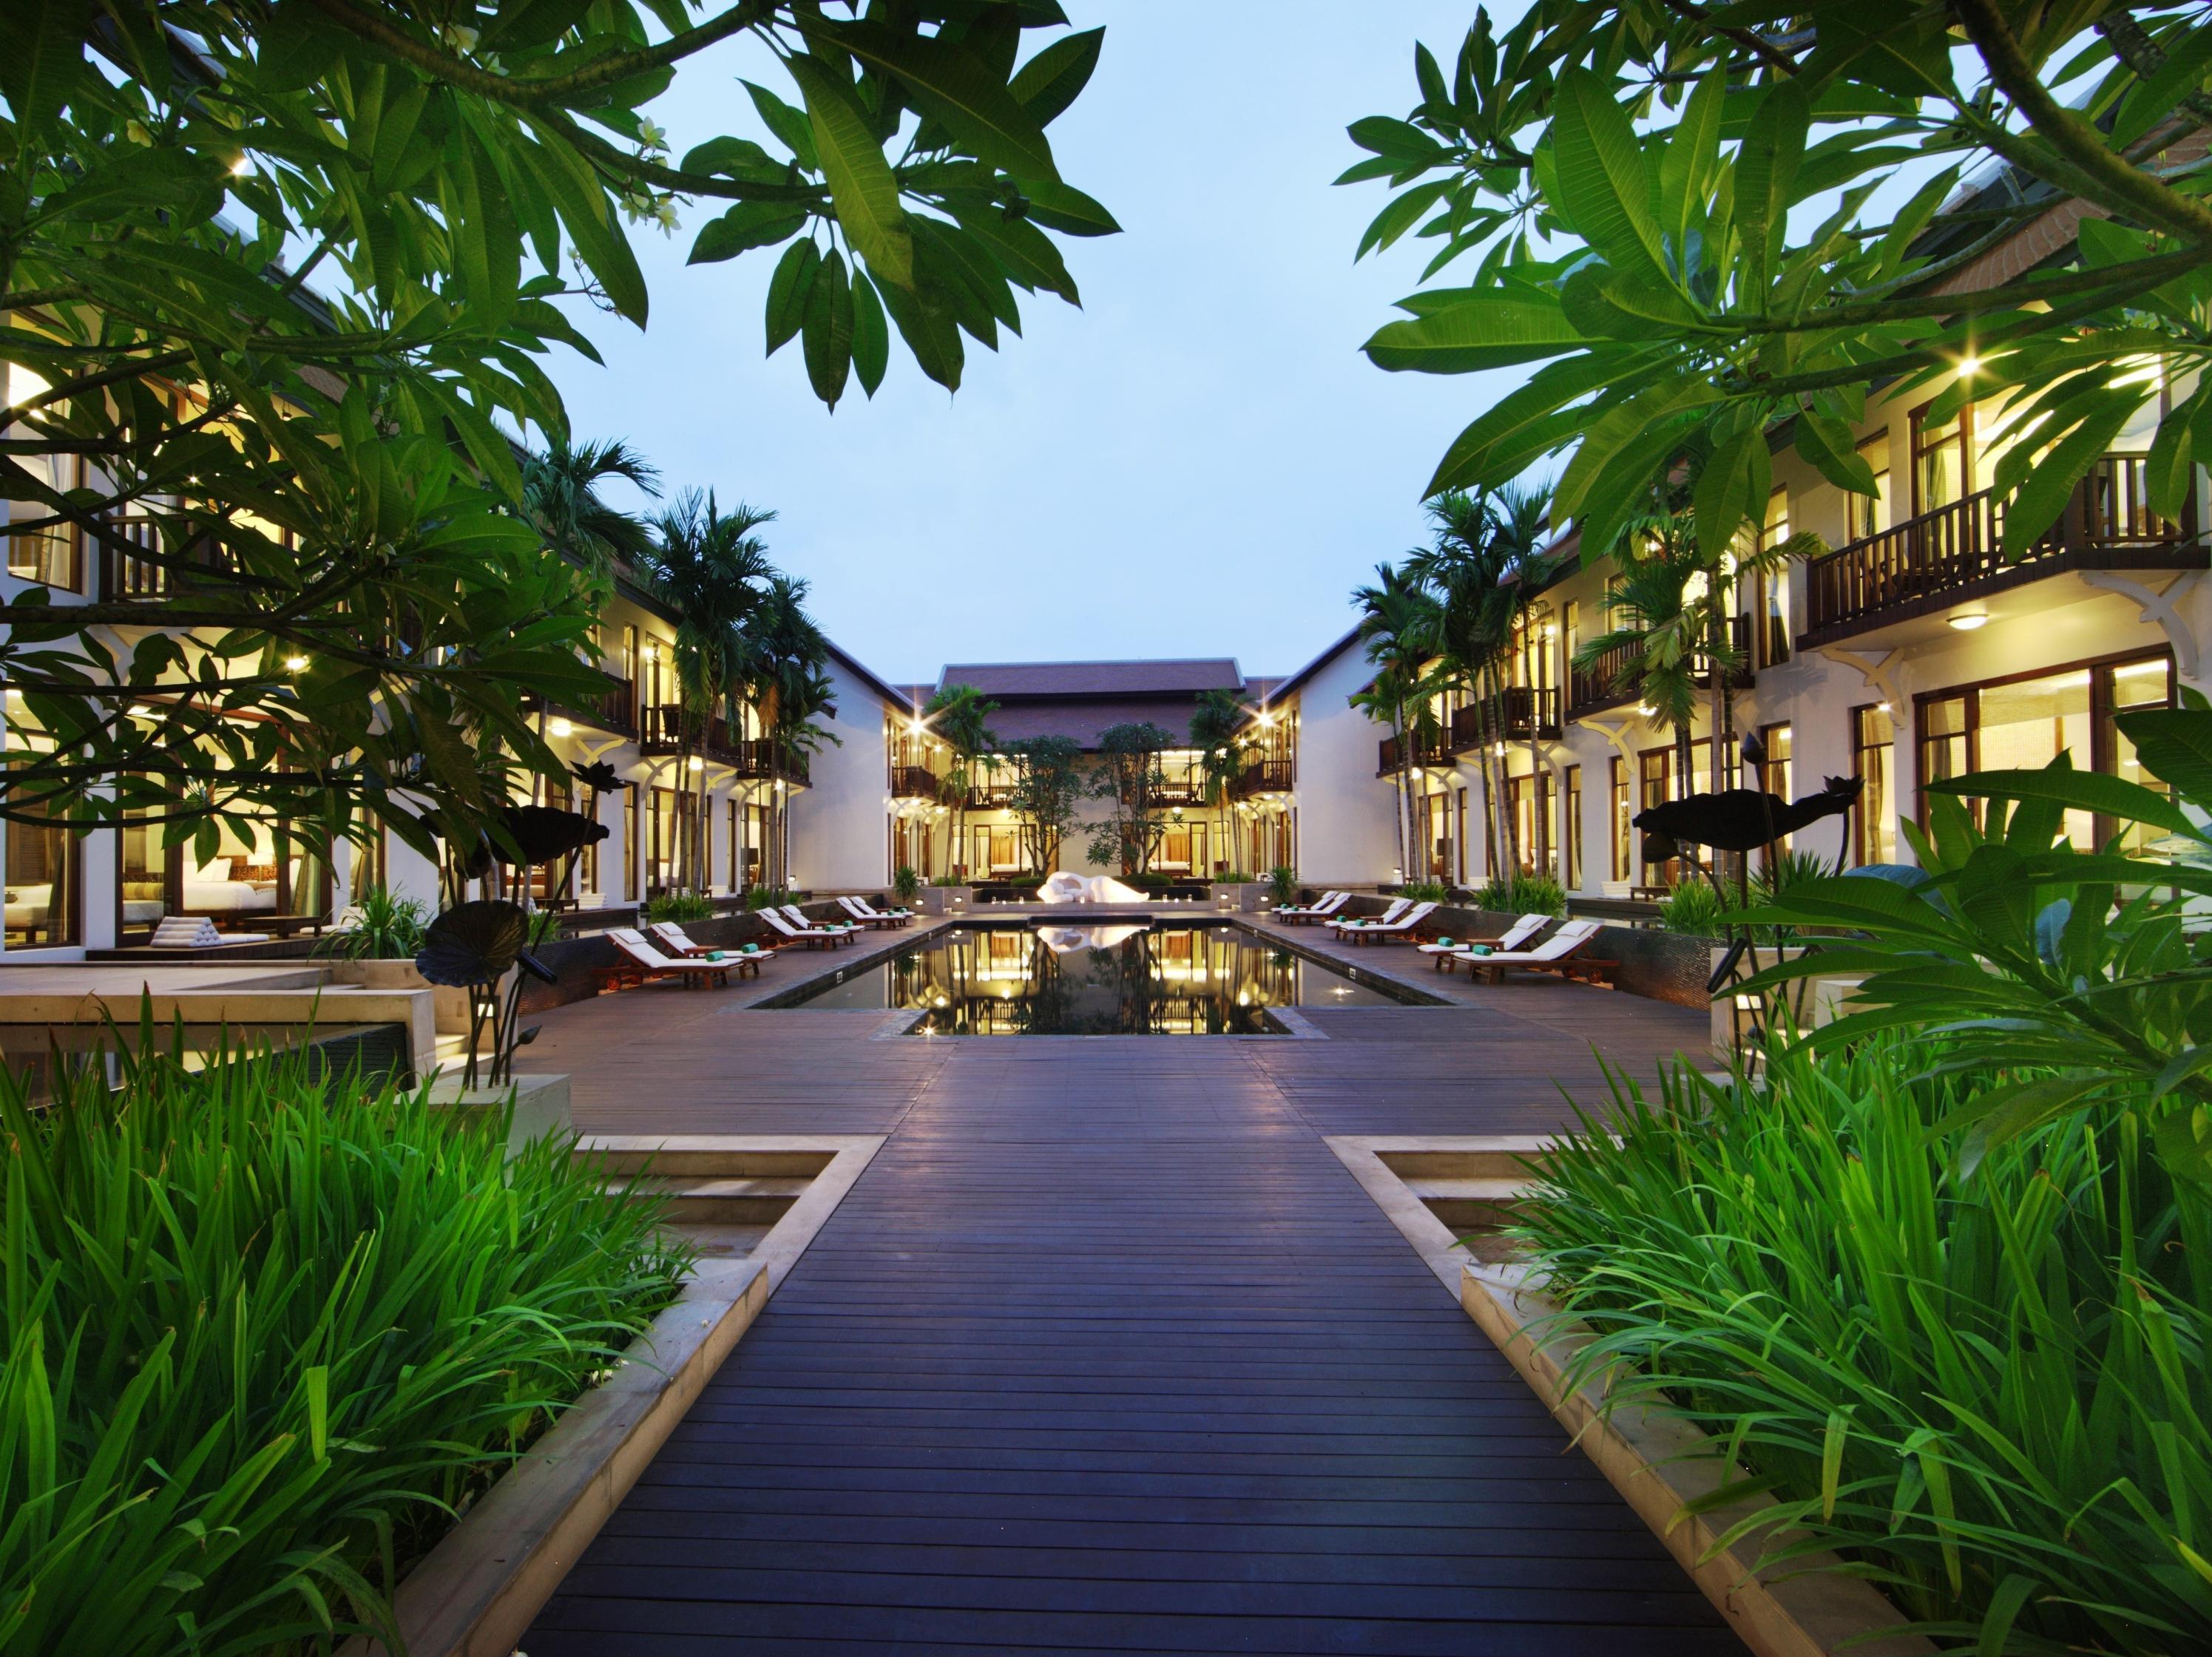 Anantara Angkor Resort Siem Reap Province FAQ 2017, What facilities are there in Anantara Angkor Resort Siem Reap Province 2017, What Languages Spoken are Supported in Anantara Angkor Resort Siem Reap Province 2017, Which payment cards are accepted in Anantara Angkor Resort Siem Reap Province , Siem Reap Province Anantara Angkor Resort room facilities and services Q&A 2017, Siem Reap Province Anantara Angkor Resort online booking services 2017, Siem Reap Province Anantara Angkor Resort address 2017, Siem Reap Province Anantara Angkor Resort telephone number 2017,Siem Reap Province Anantara Angkor Resort map 2017, Siem Reap Province Anantara Angkor Resort traffic guide 2017, how to go Siem Reap Province Anantara Angkor Resort, Siem Reap Province Anantara Angkor Resort booking online 2017, Siem Reap Province Anantara Angkor Resort room types 2017.